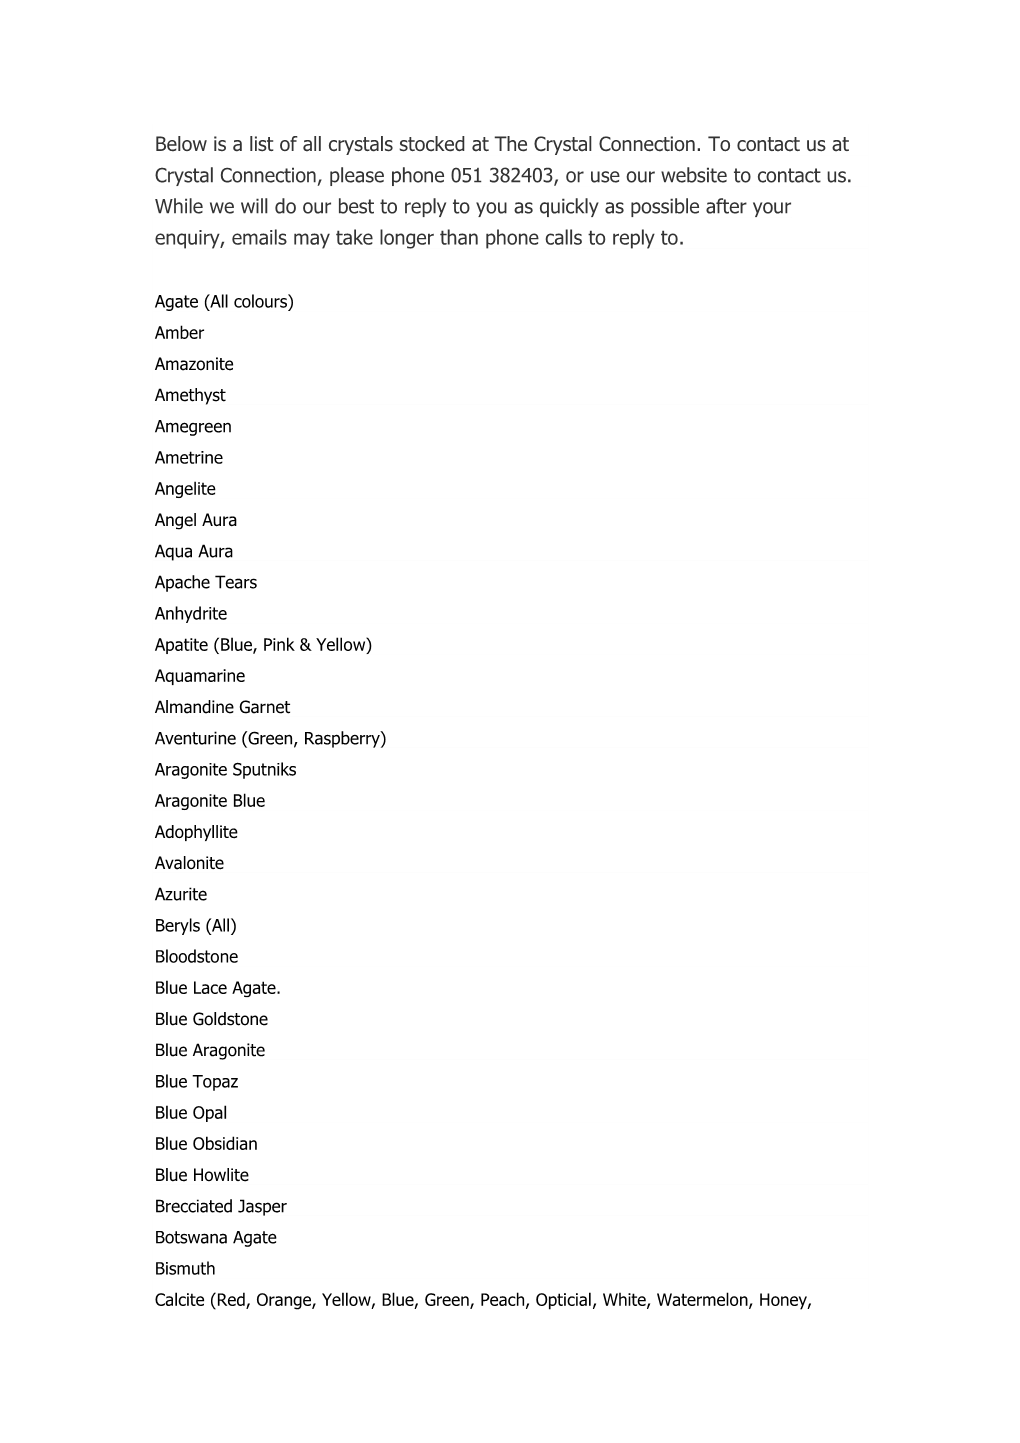 Below Is a List of All Crystals Stocked at the Crystal Connection. to Contact Us at Crystal Connection, Please Phone 051 382403, Or Use Our Website to Contact Us